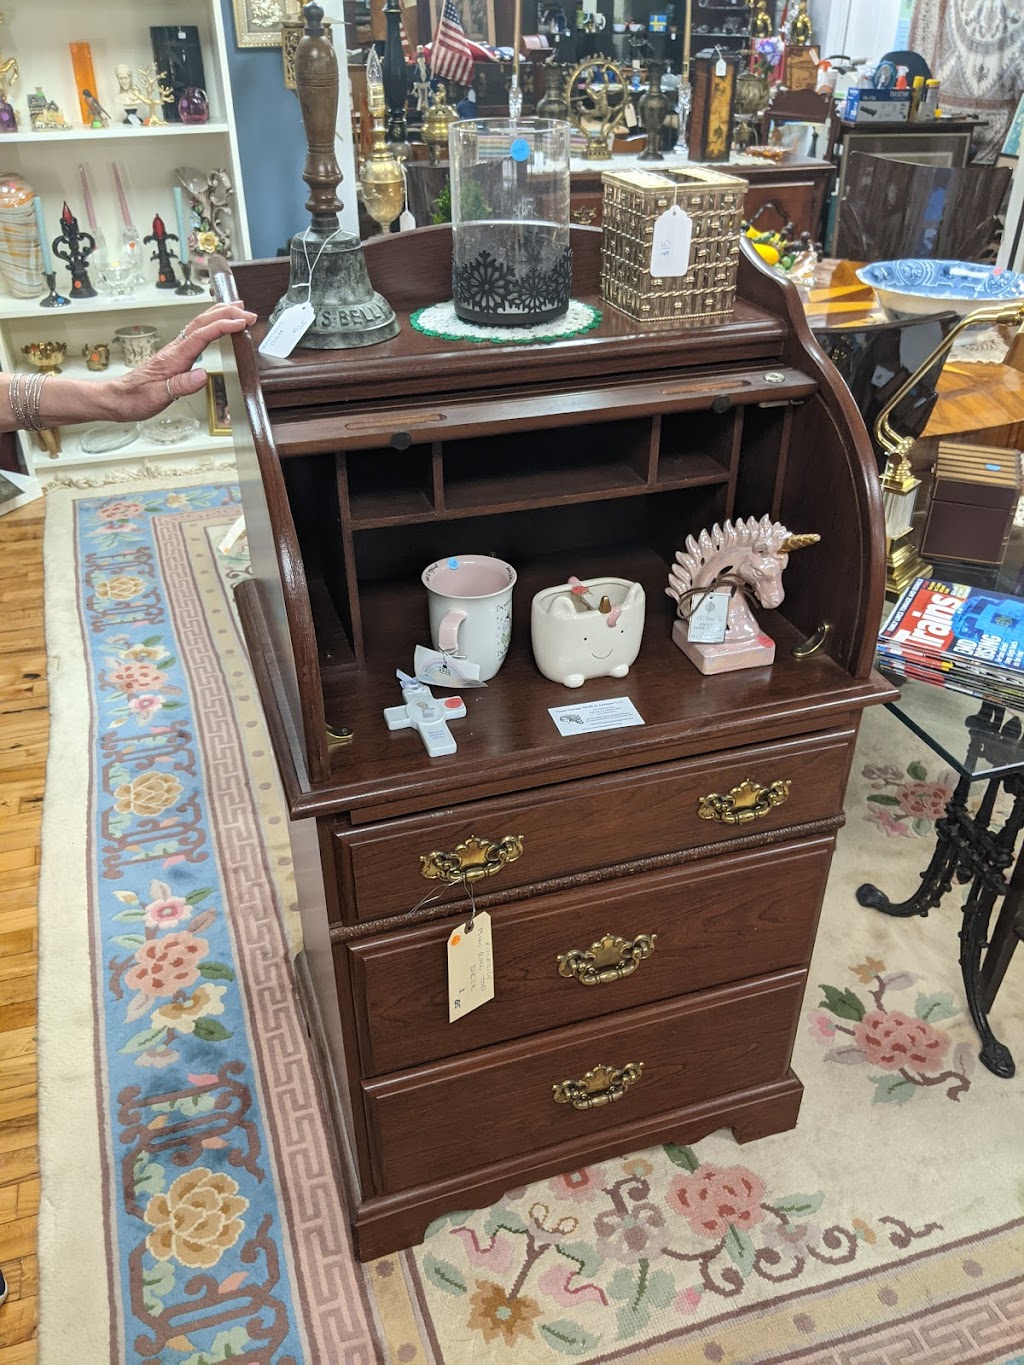 Venus Vintage Thrift and Antiques | 178 Penn Ave, Telford, PA 18969 | Phone: (215) 239-6070